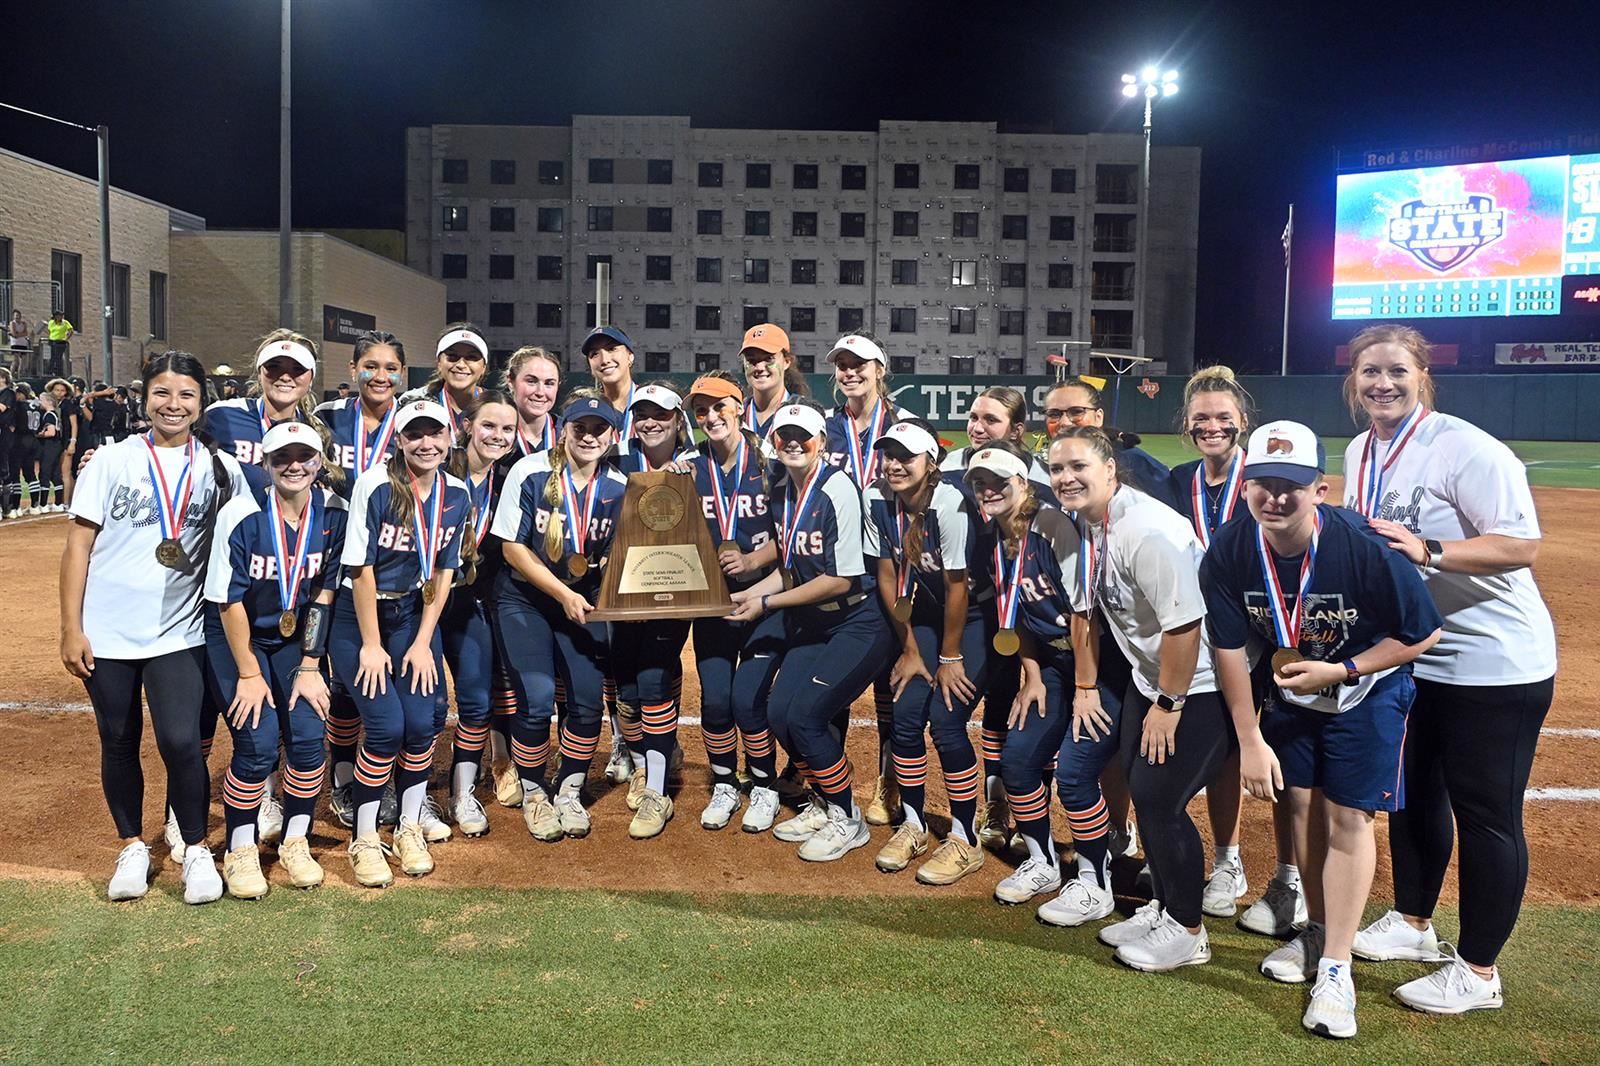 The Bridgeland High School softball team poses for photos following its Class 6A state semifinal game against Denton Guyer.